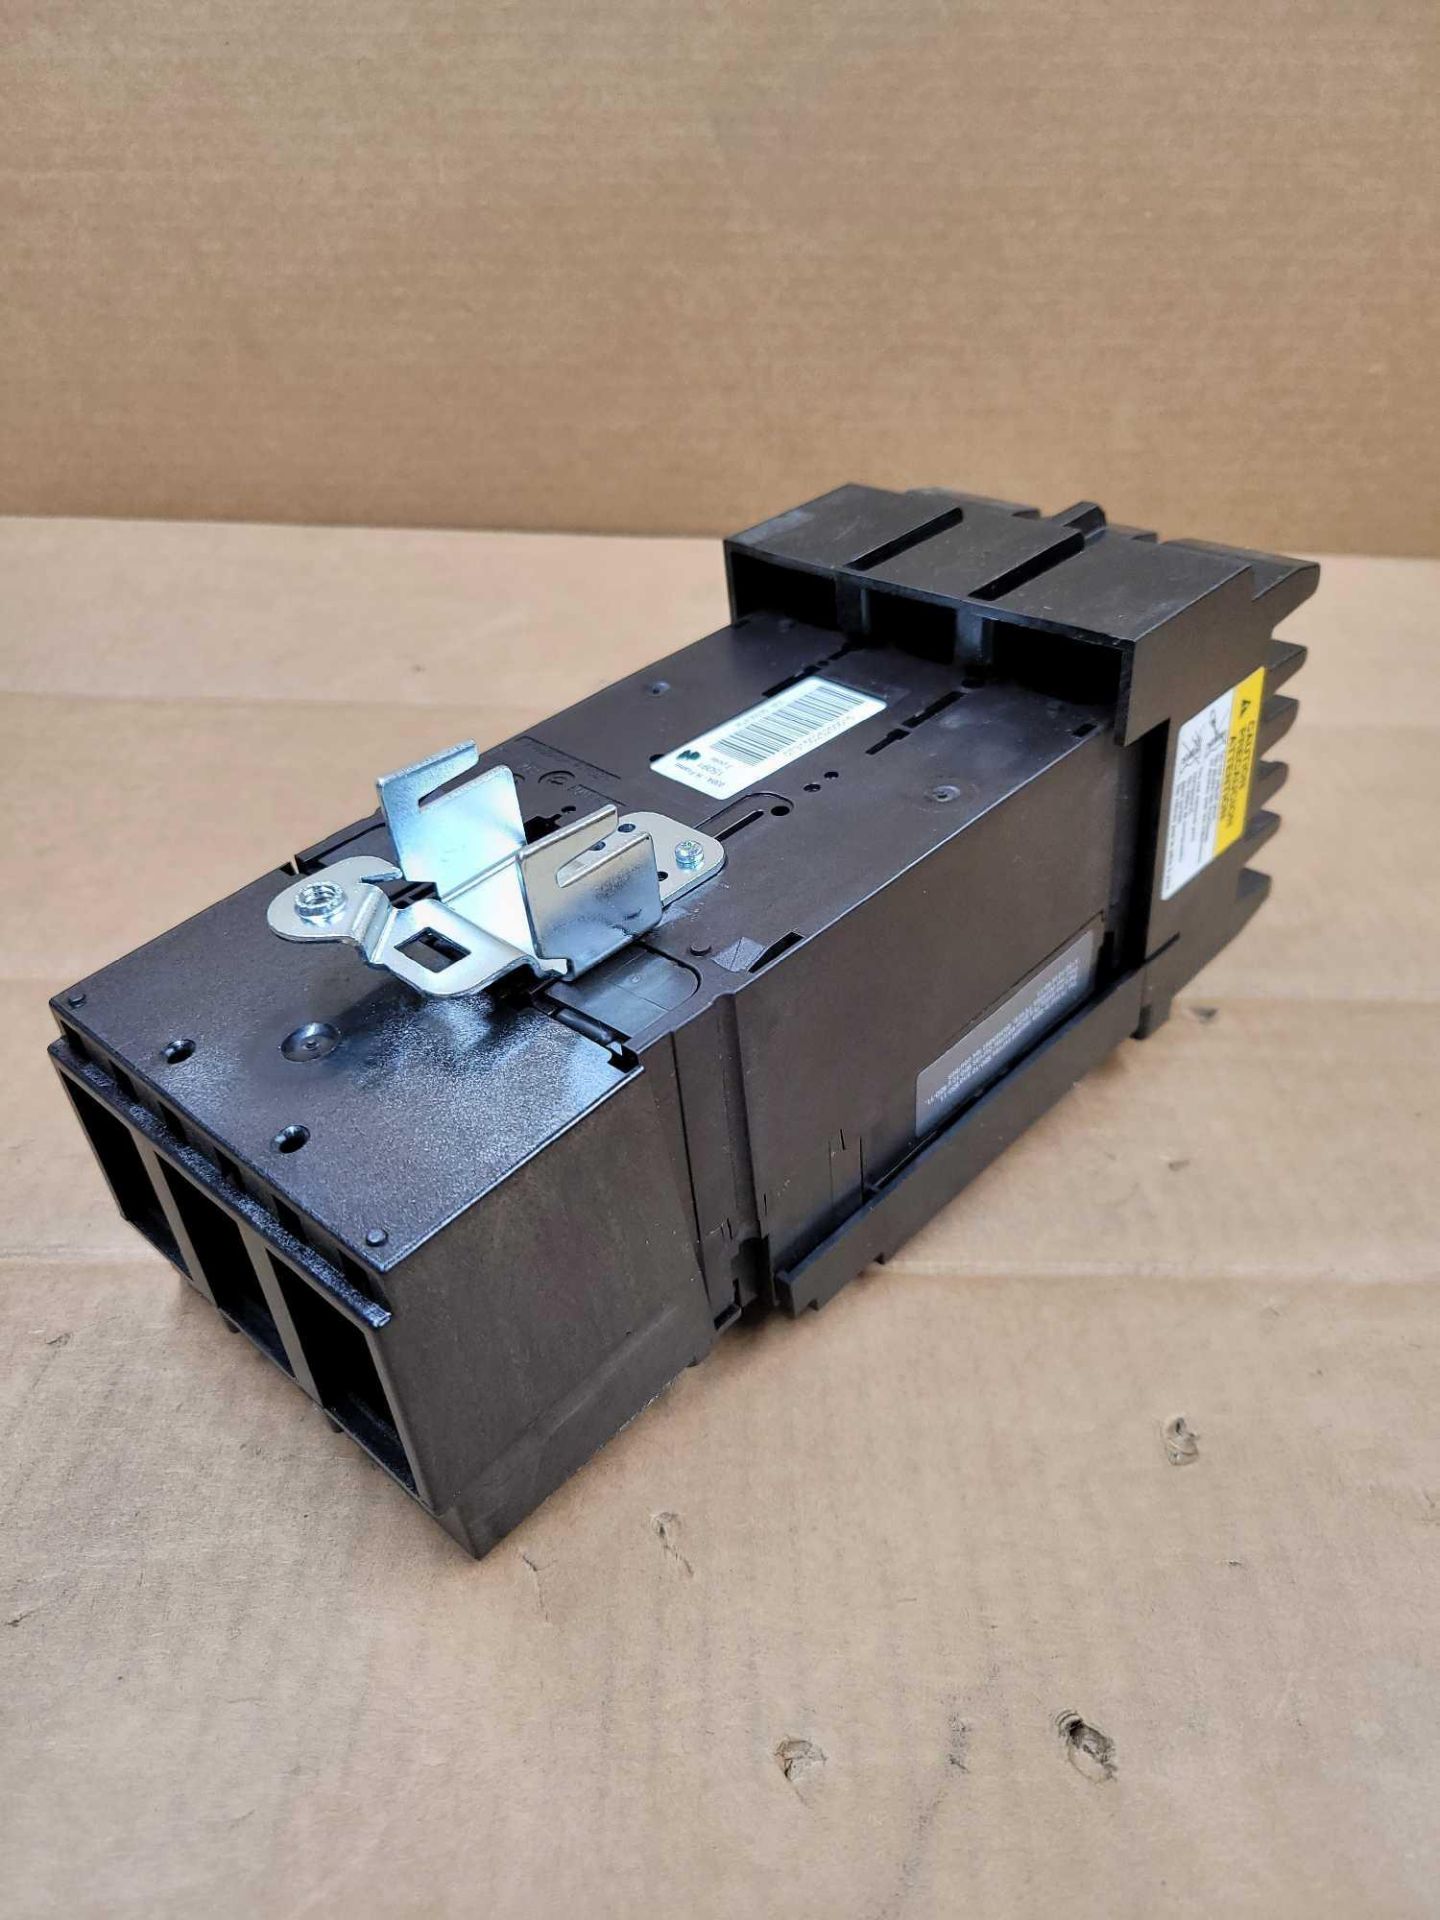 LOT OF 2 SQUARE D HJA36030 / 30 Amp Molded Case Circuit Breaker  /  Lot Weight: 9.8 lbs - Image 5 of 6